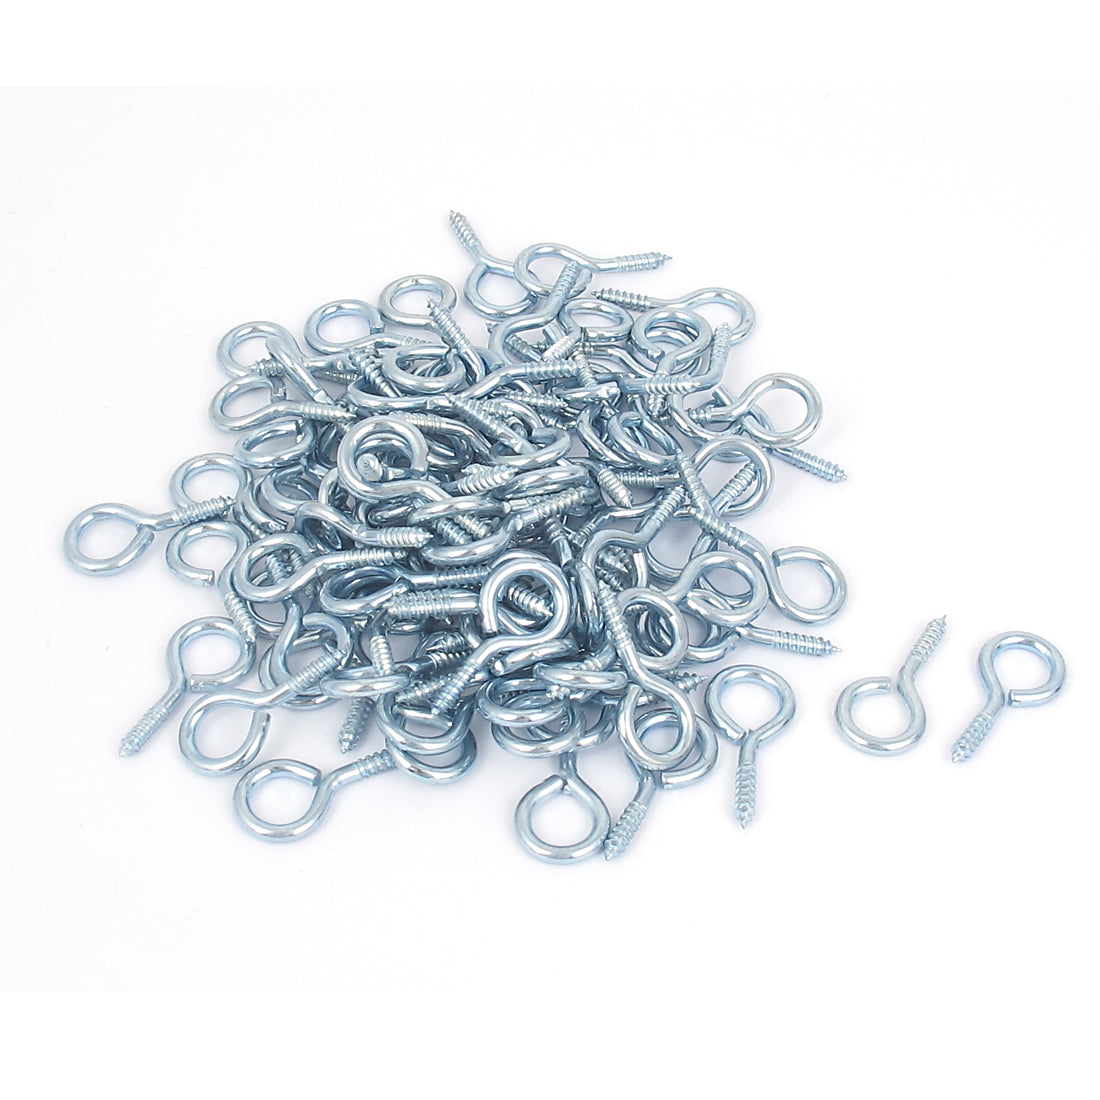 uxcell Uxcell 100 Pcs Blue Zinc Plated Ring Screw Eye Bolt Hook for Jewelry Findings